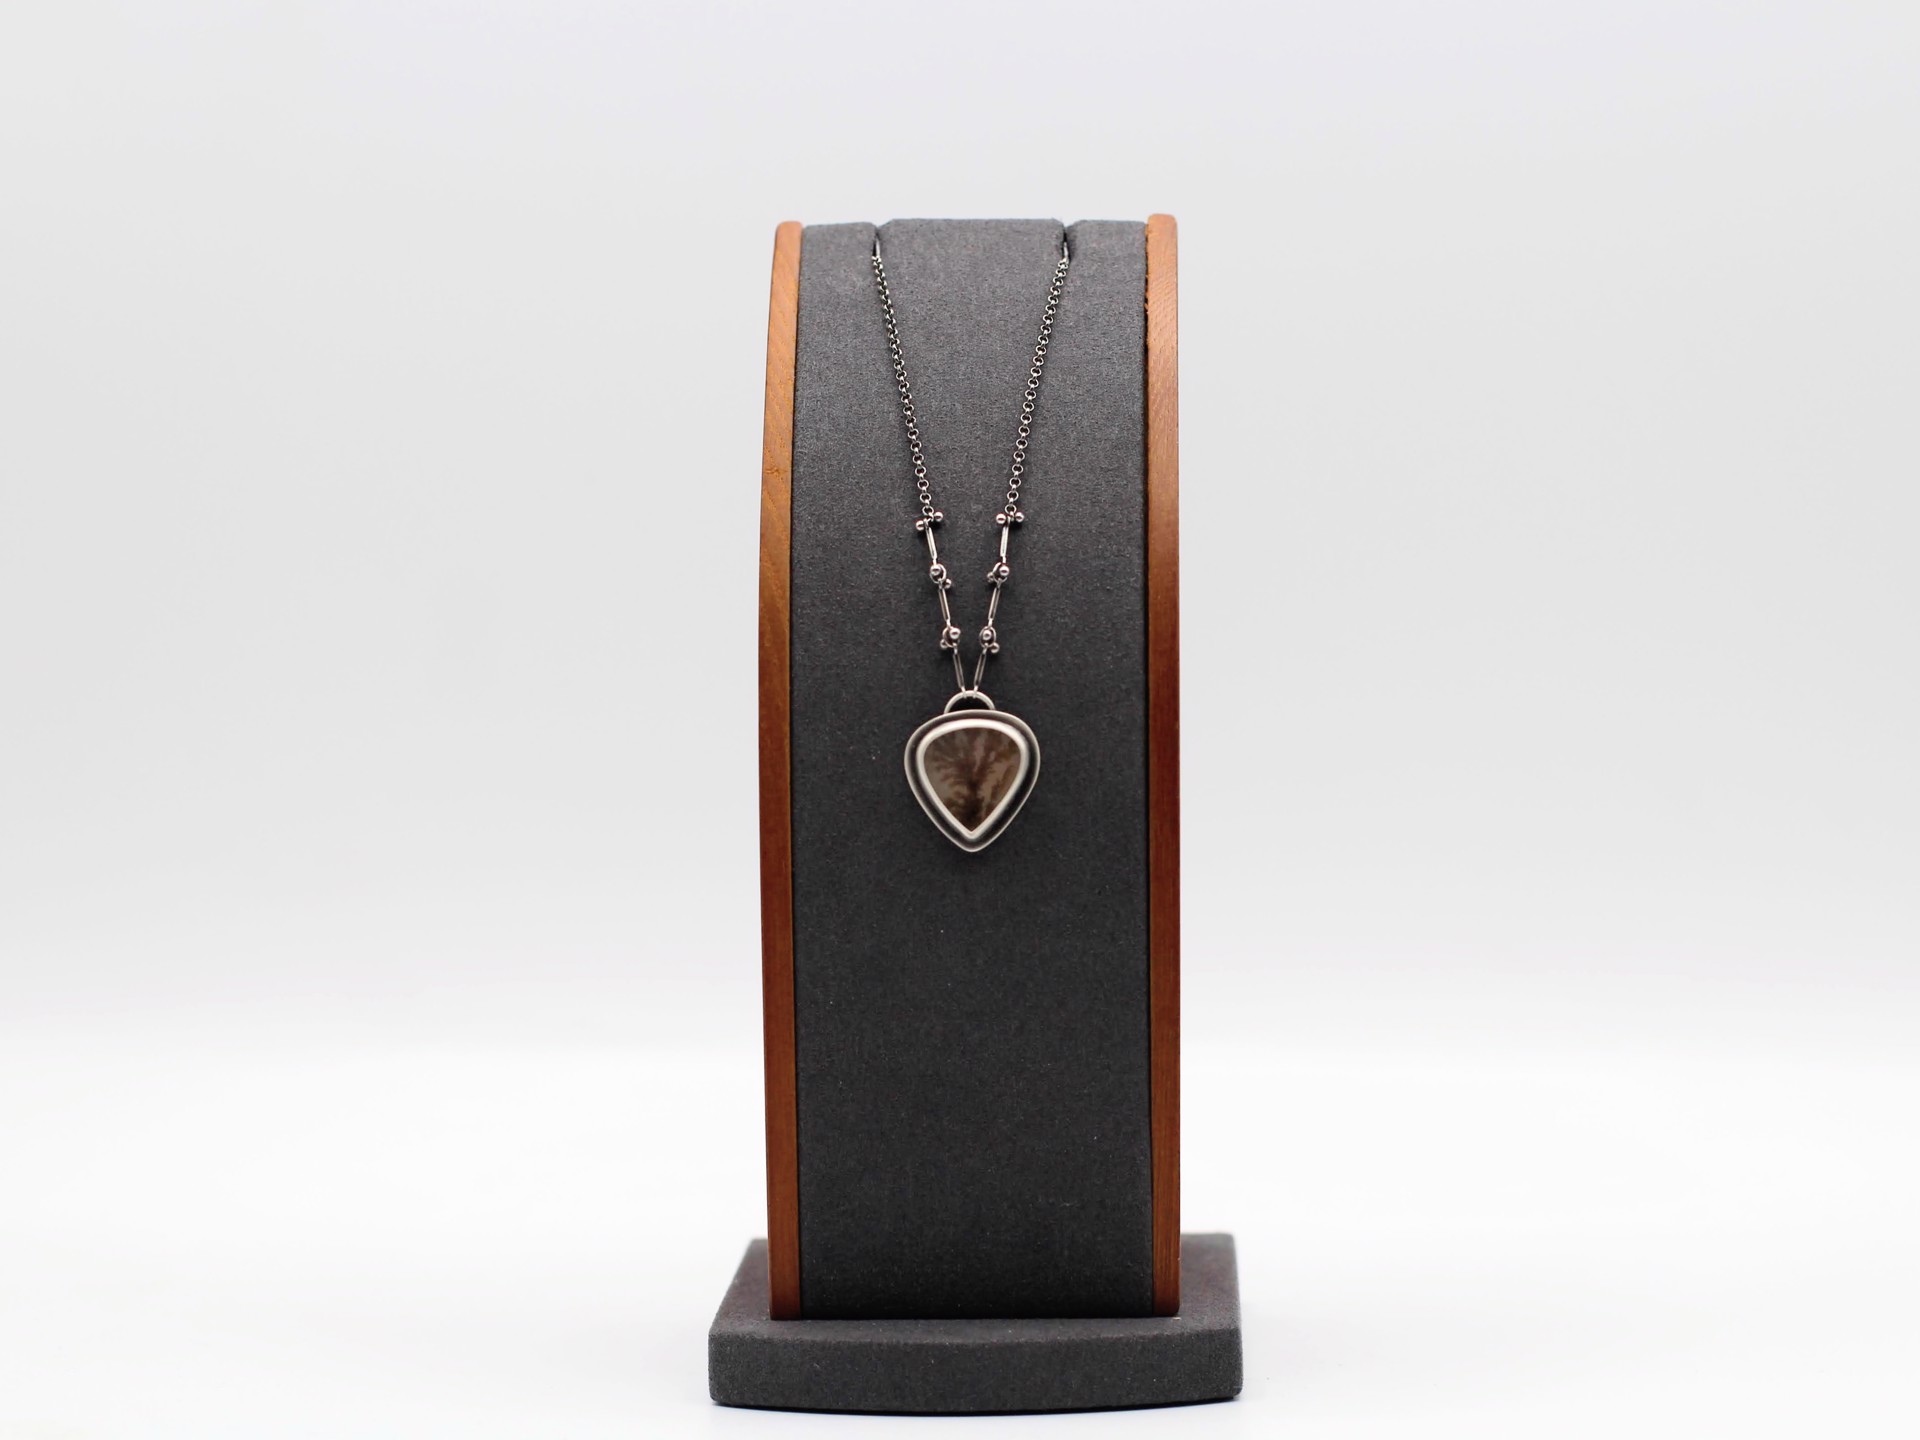 Dendritic Agate with Branch Chain Necklace by Kim Knuth